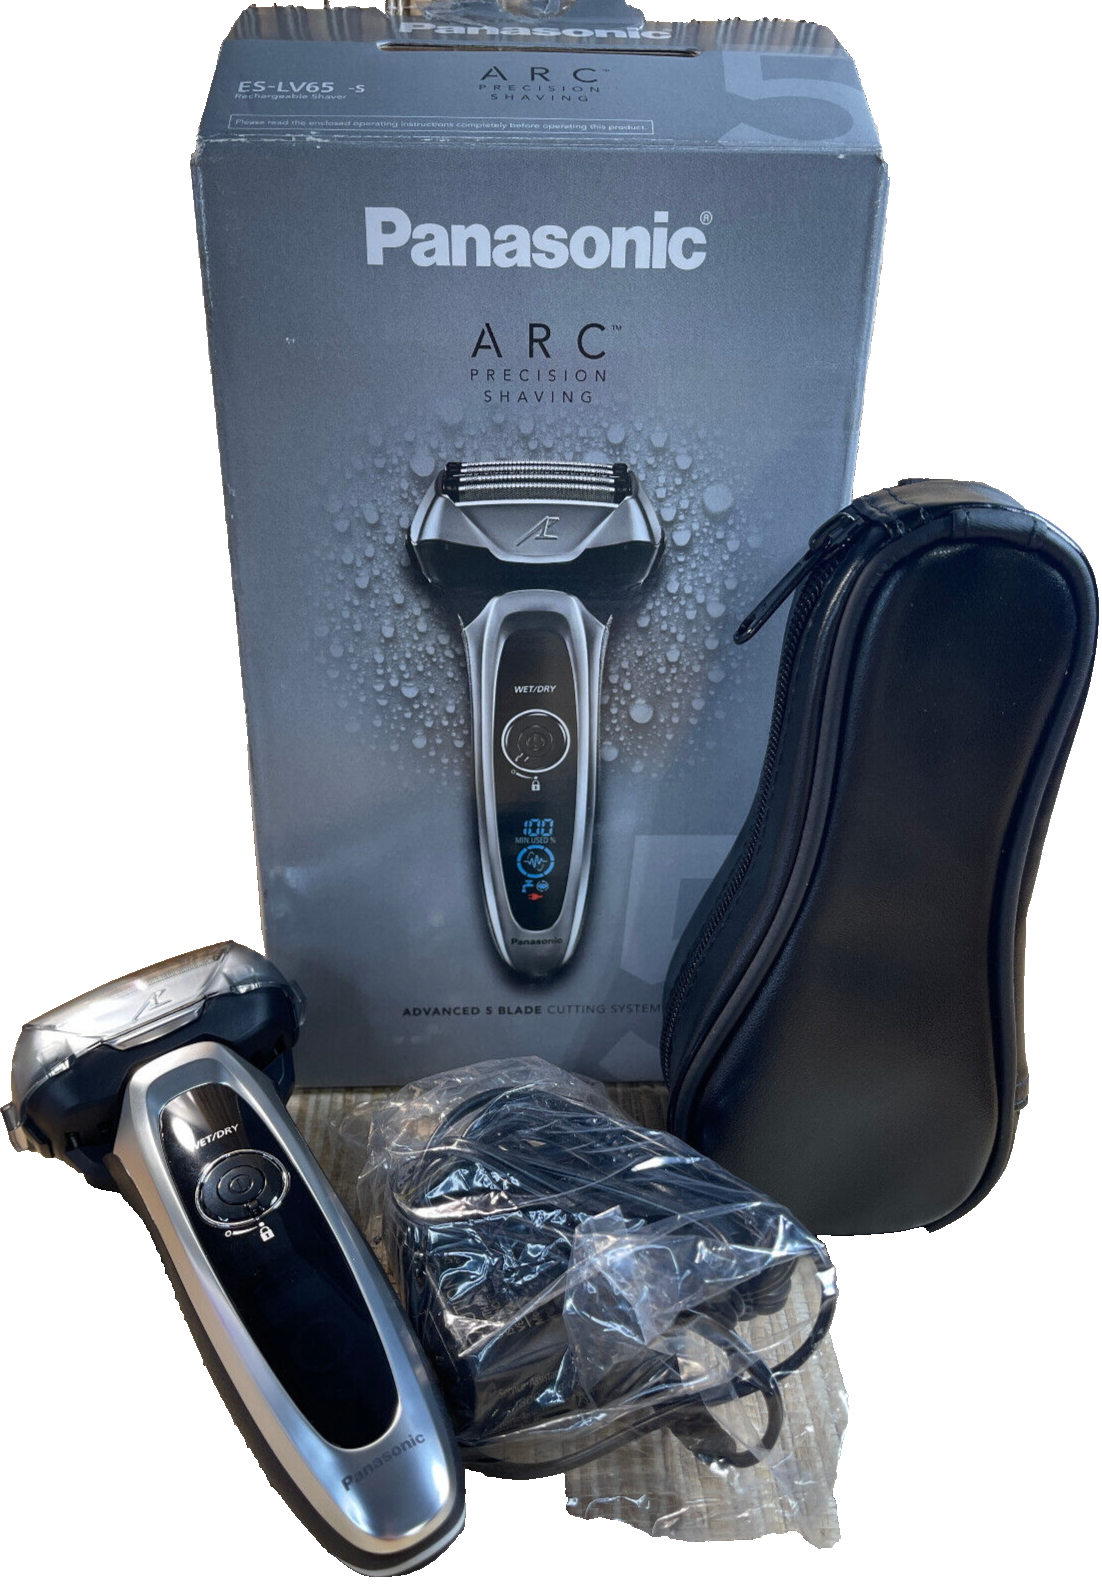 Panasonic ARC Electric Razor for Men with Pop-Up Trimmer, Wet/Dry 5-Blade - $98.99